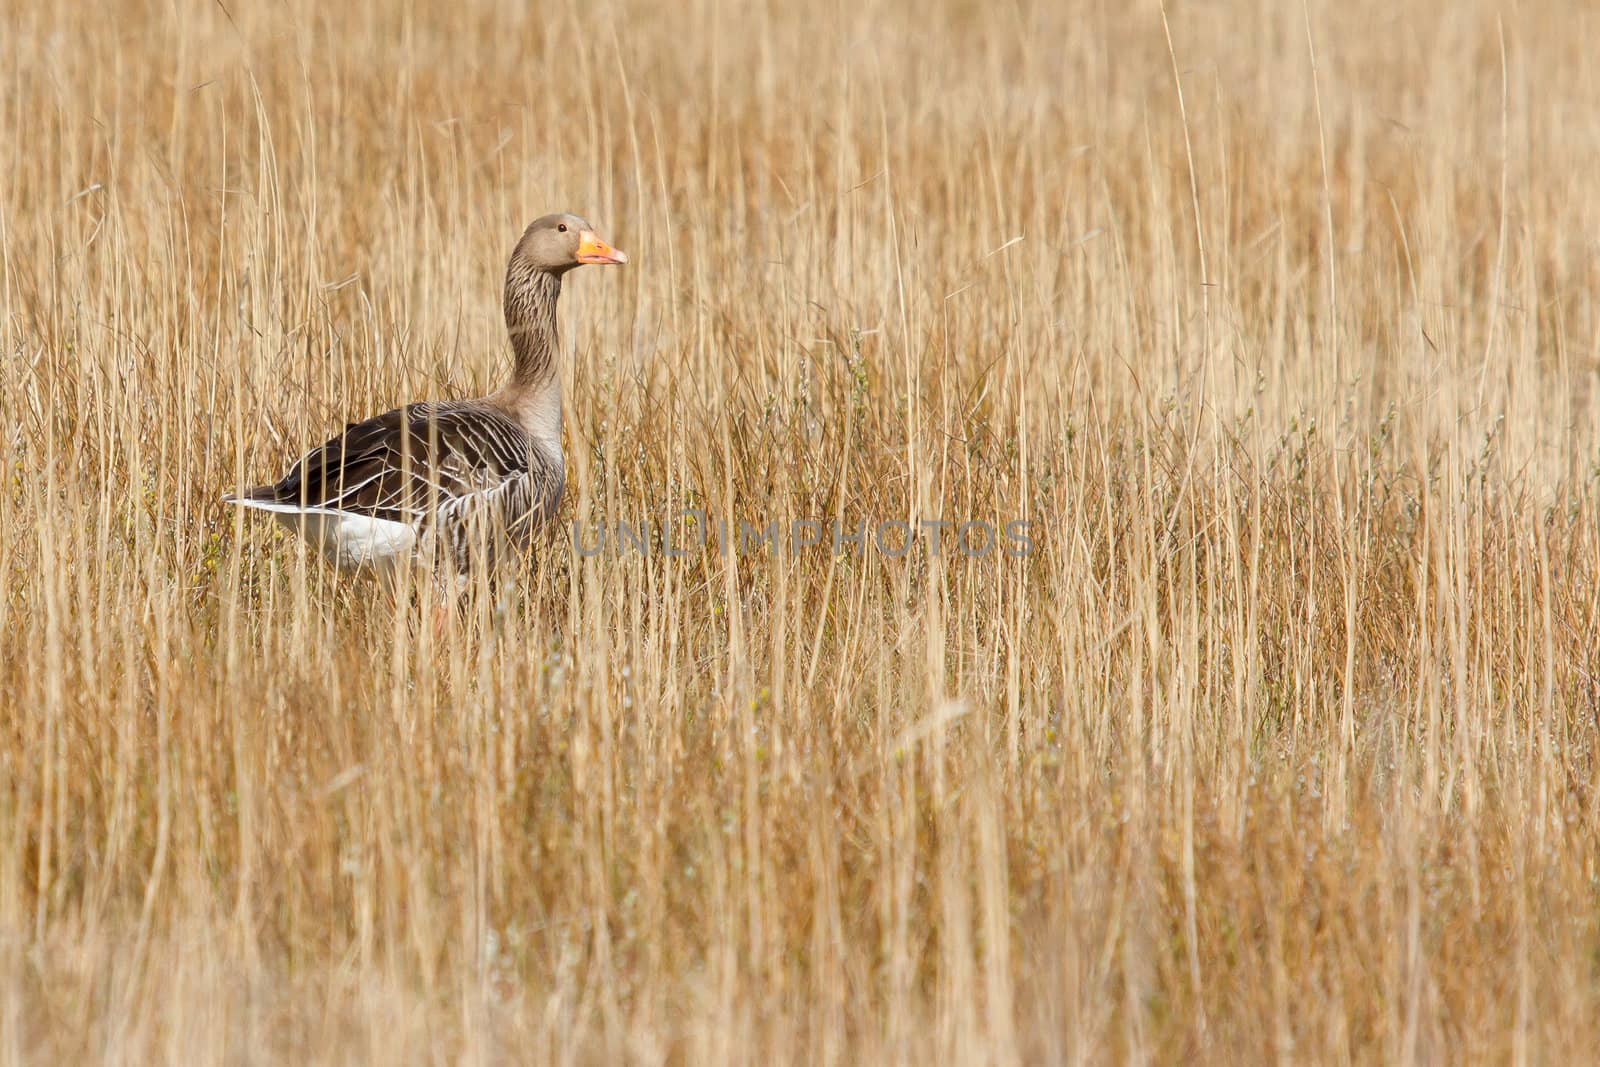 A greylag goose is hiding in the reeds